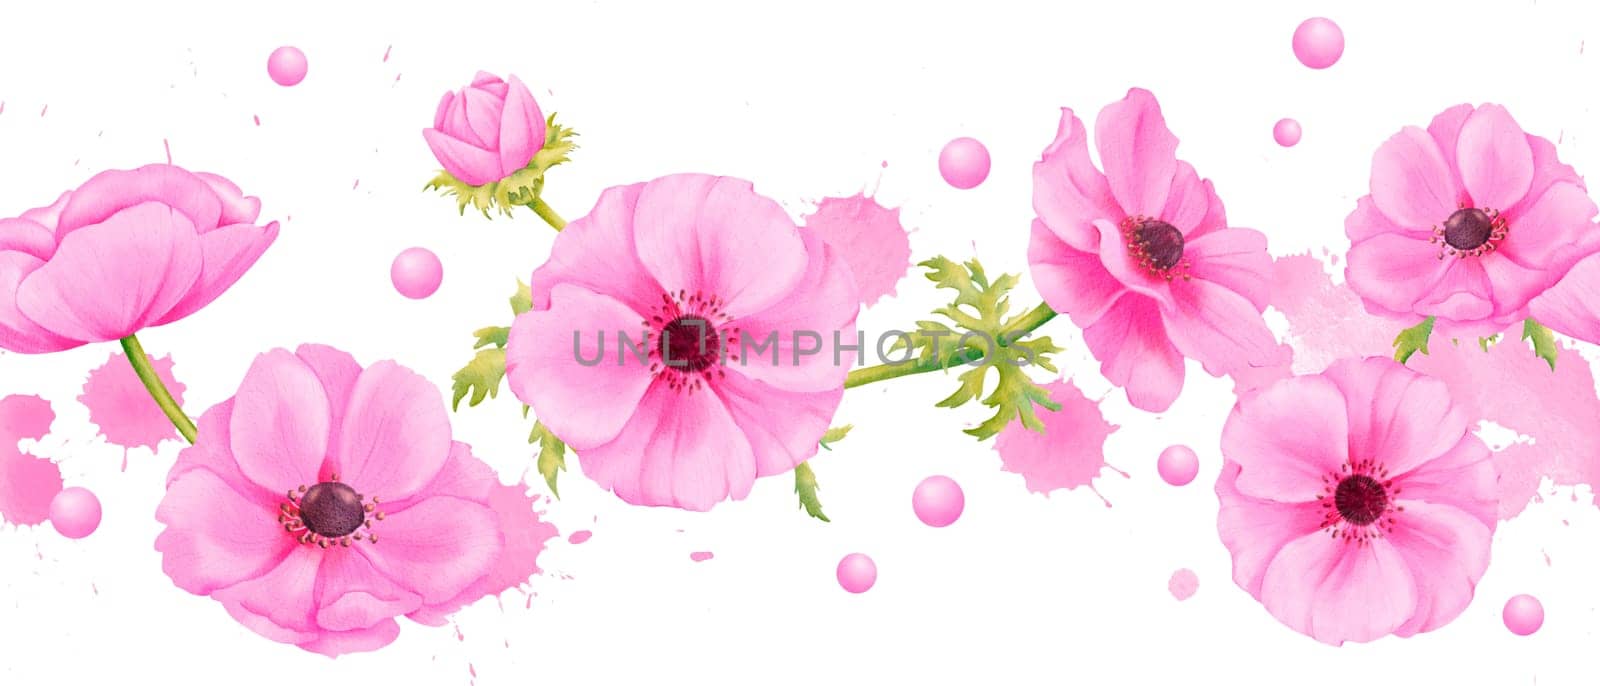 A seamless border featuring delicate pink anemones, adorned with rhinestones. watercolor illustration with soft water droplets and splashes. for embellishing wedding invitations, greeting cards.